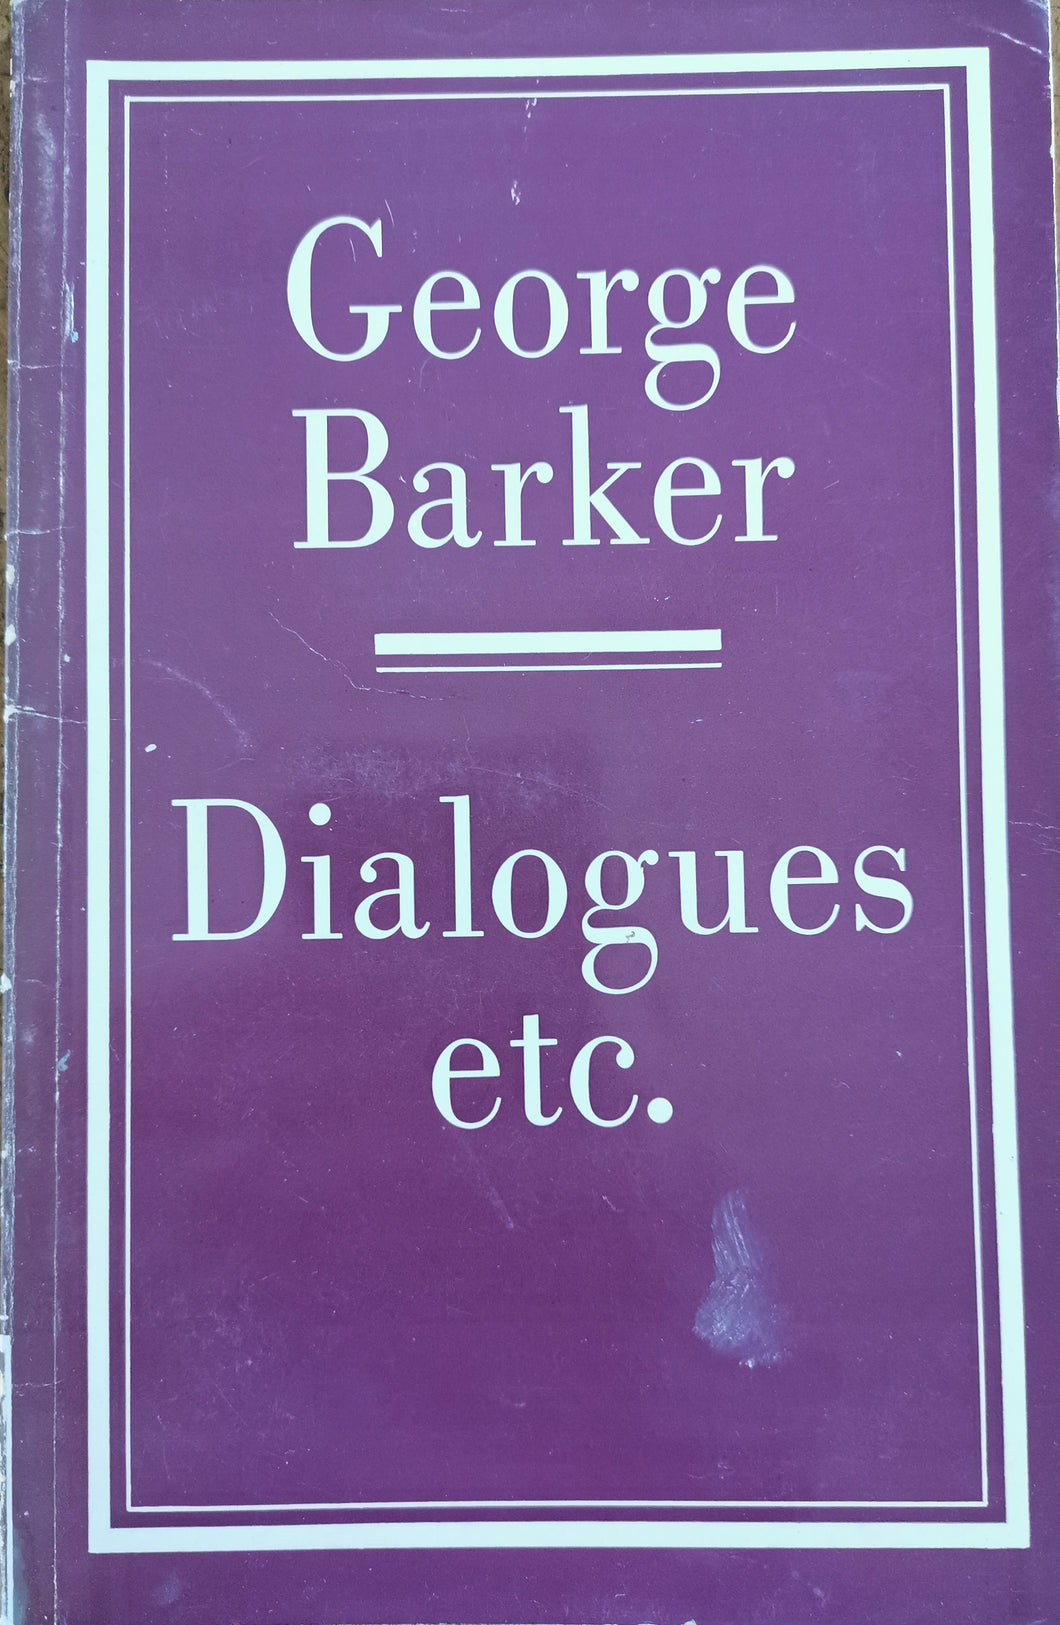 George Barker - Dialogues